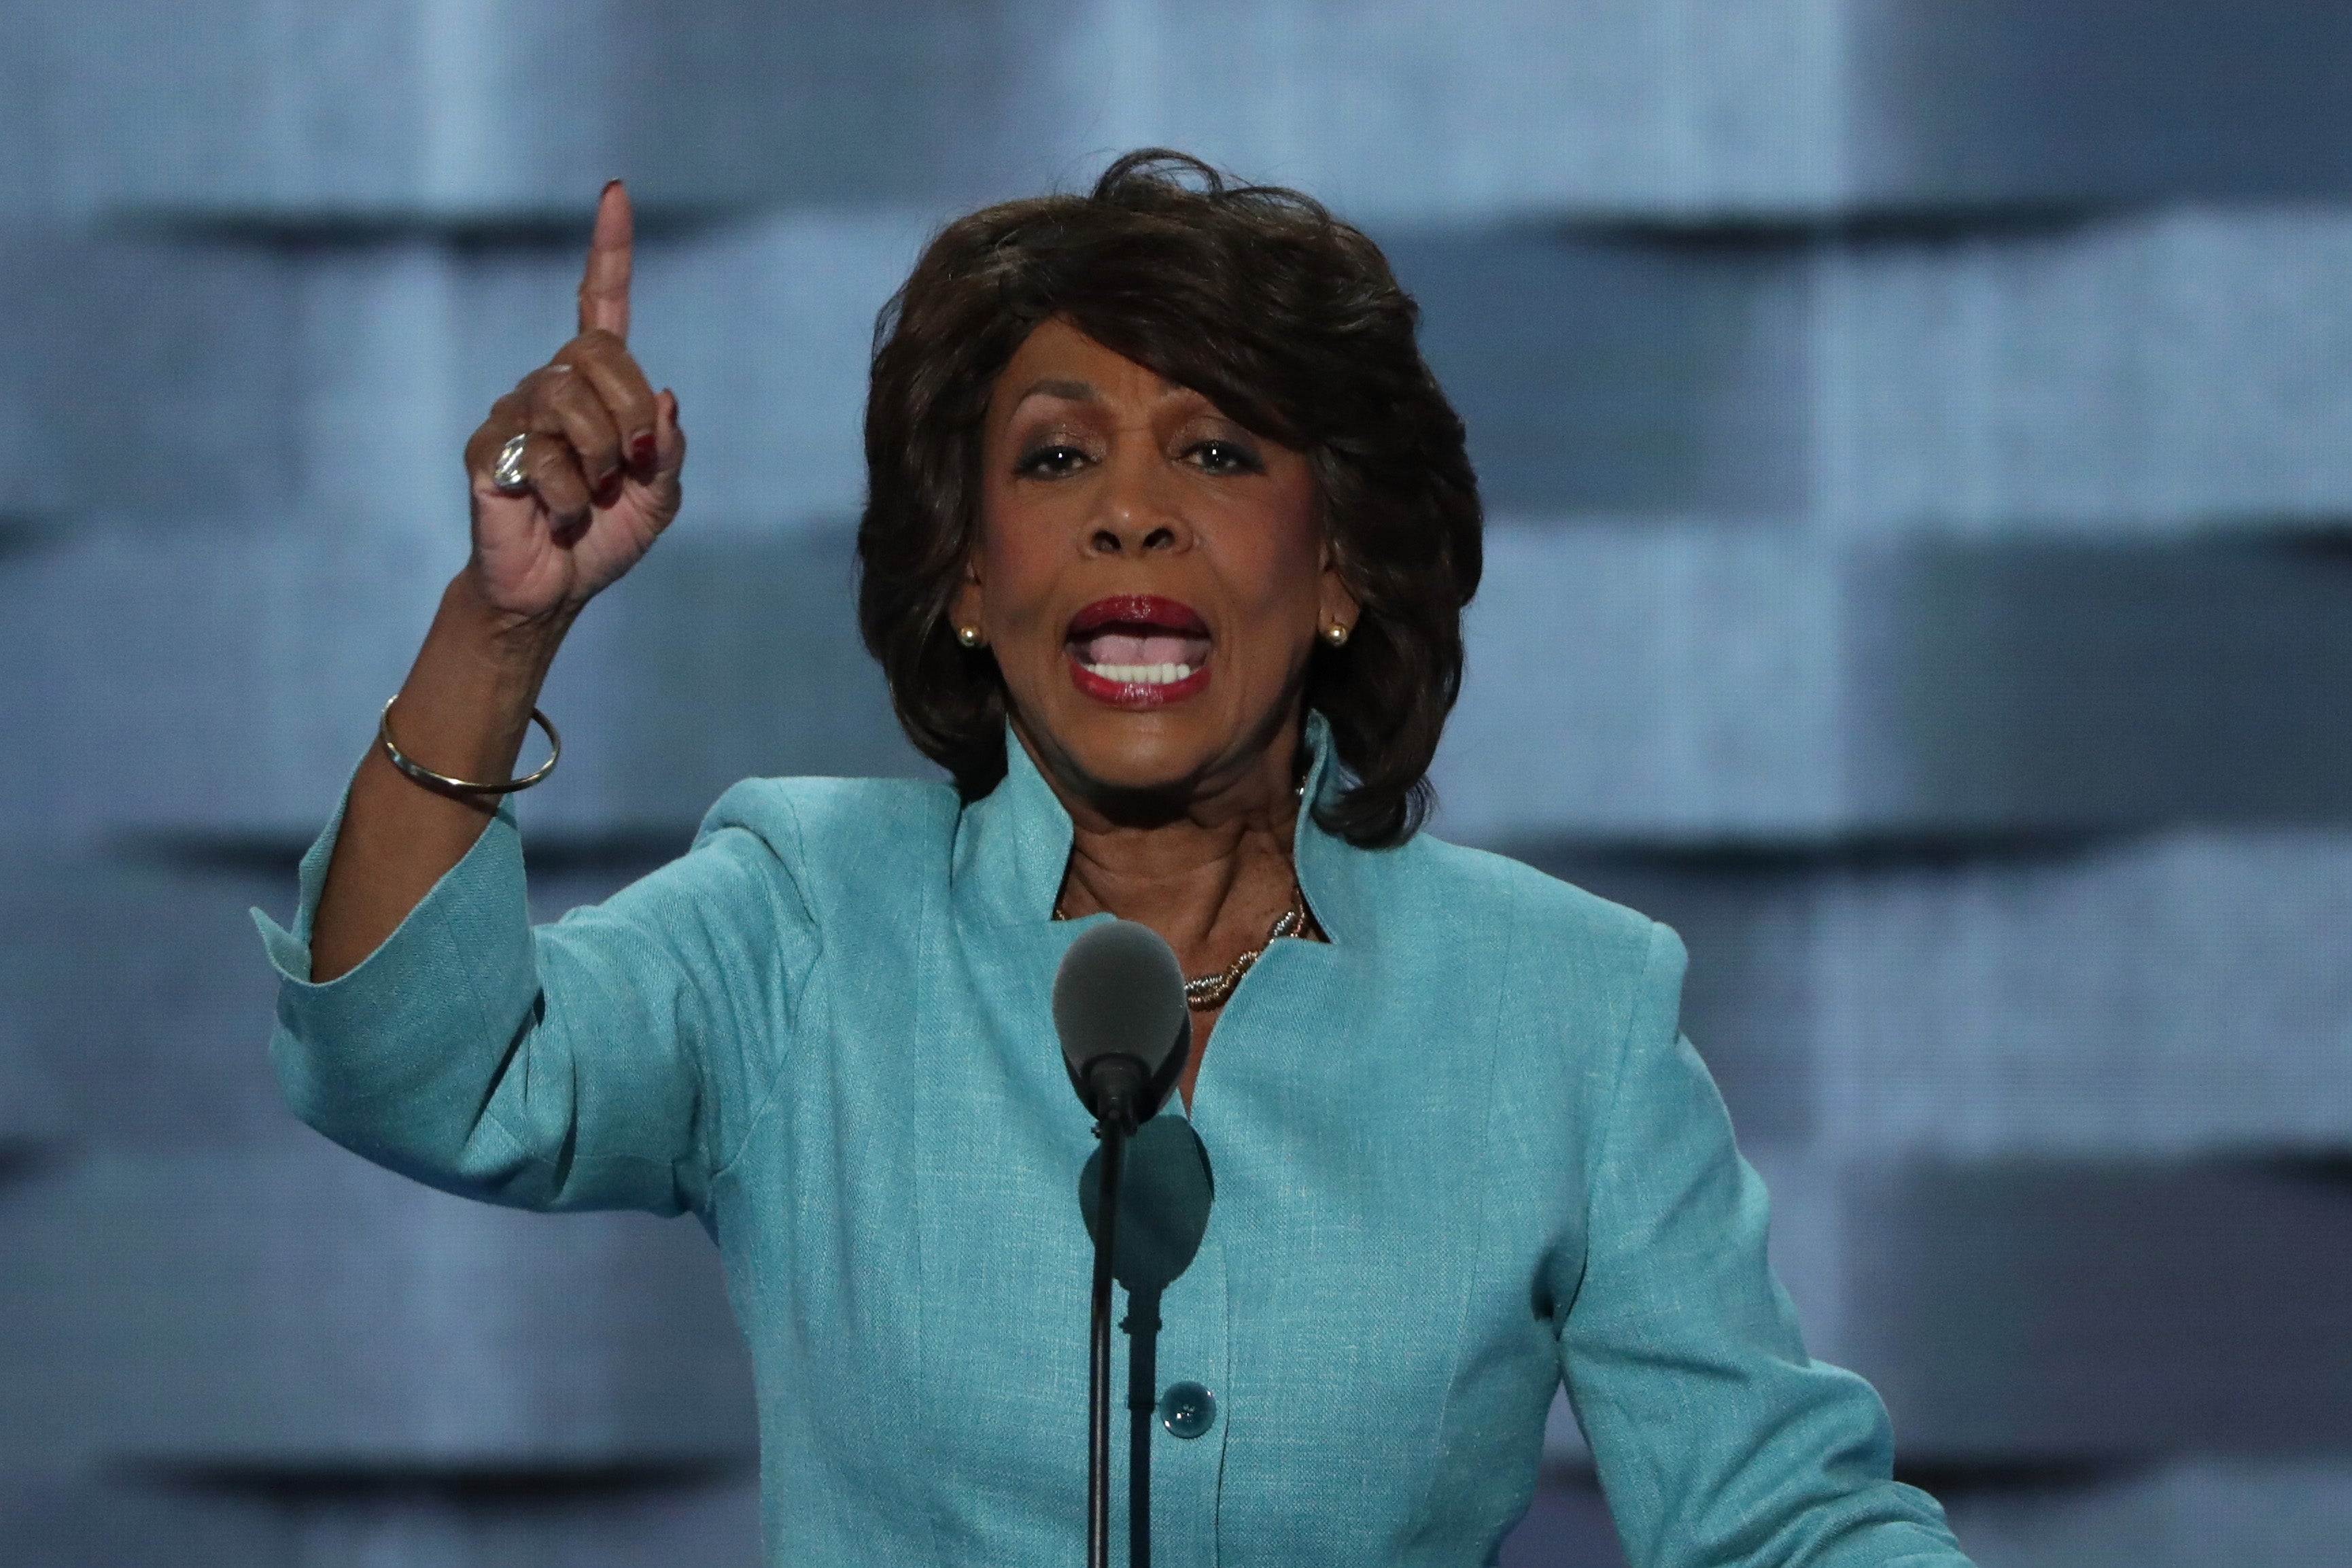 Maxine Waters Vows To Fight For Progressive Values After Democratic Win: ‘They Came After Me In Every Way They Could’